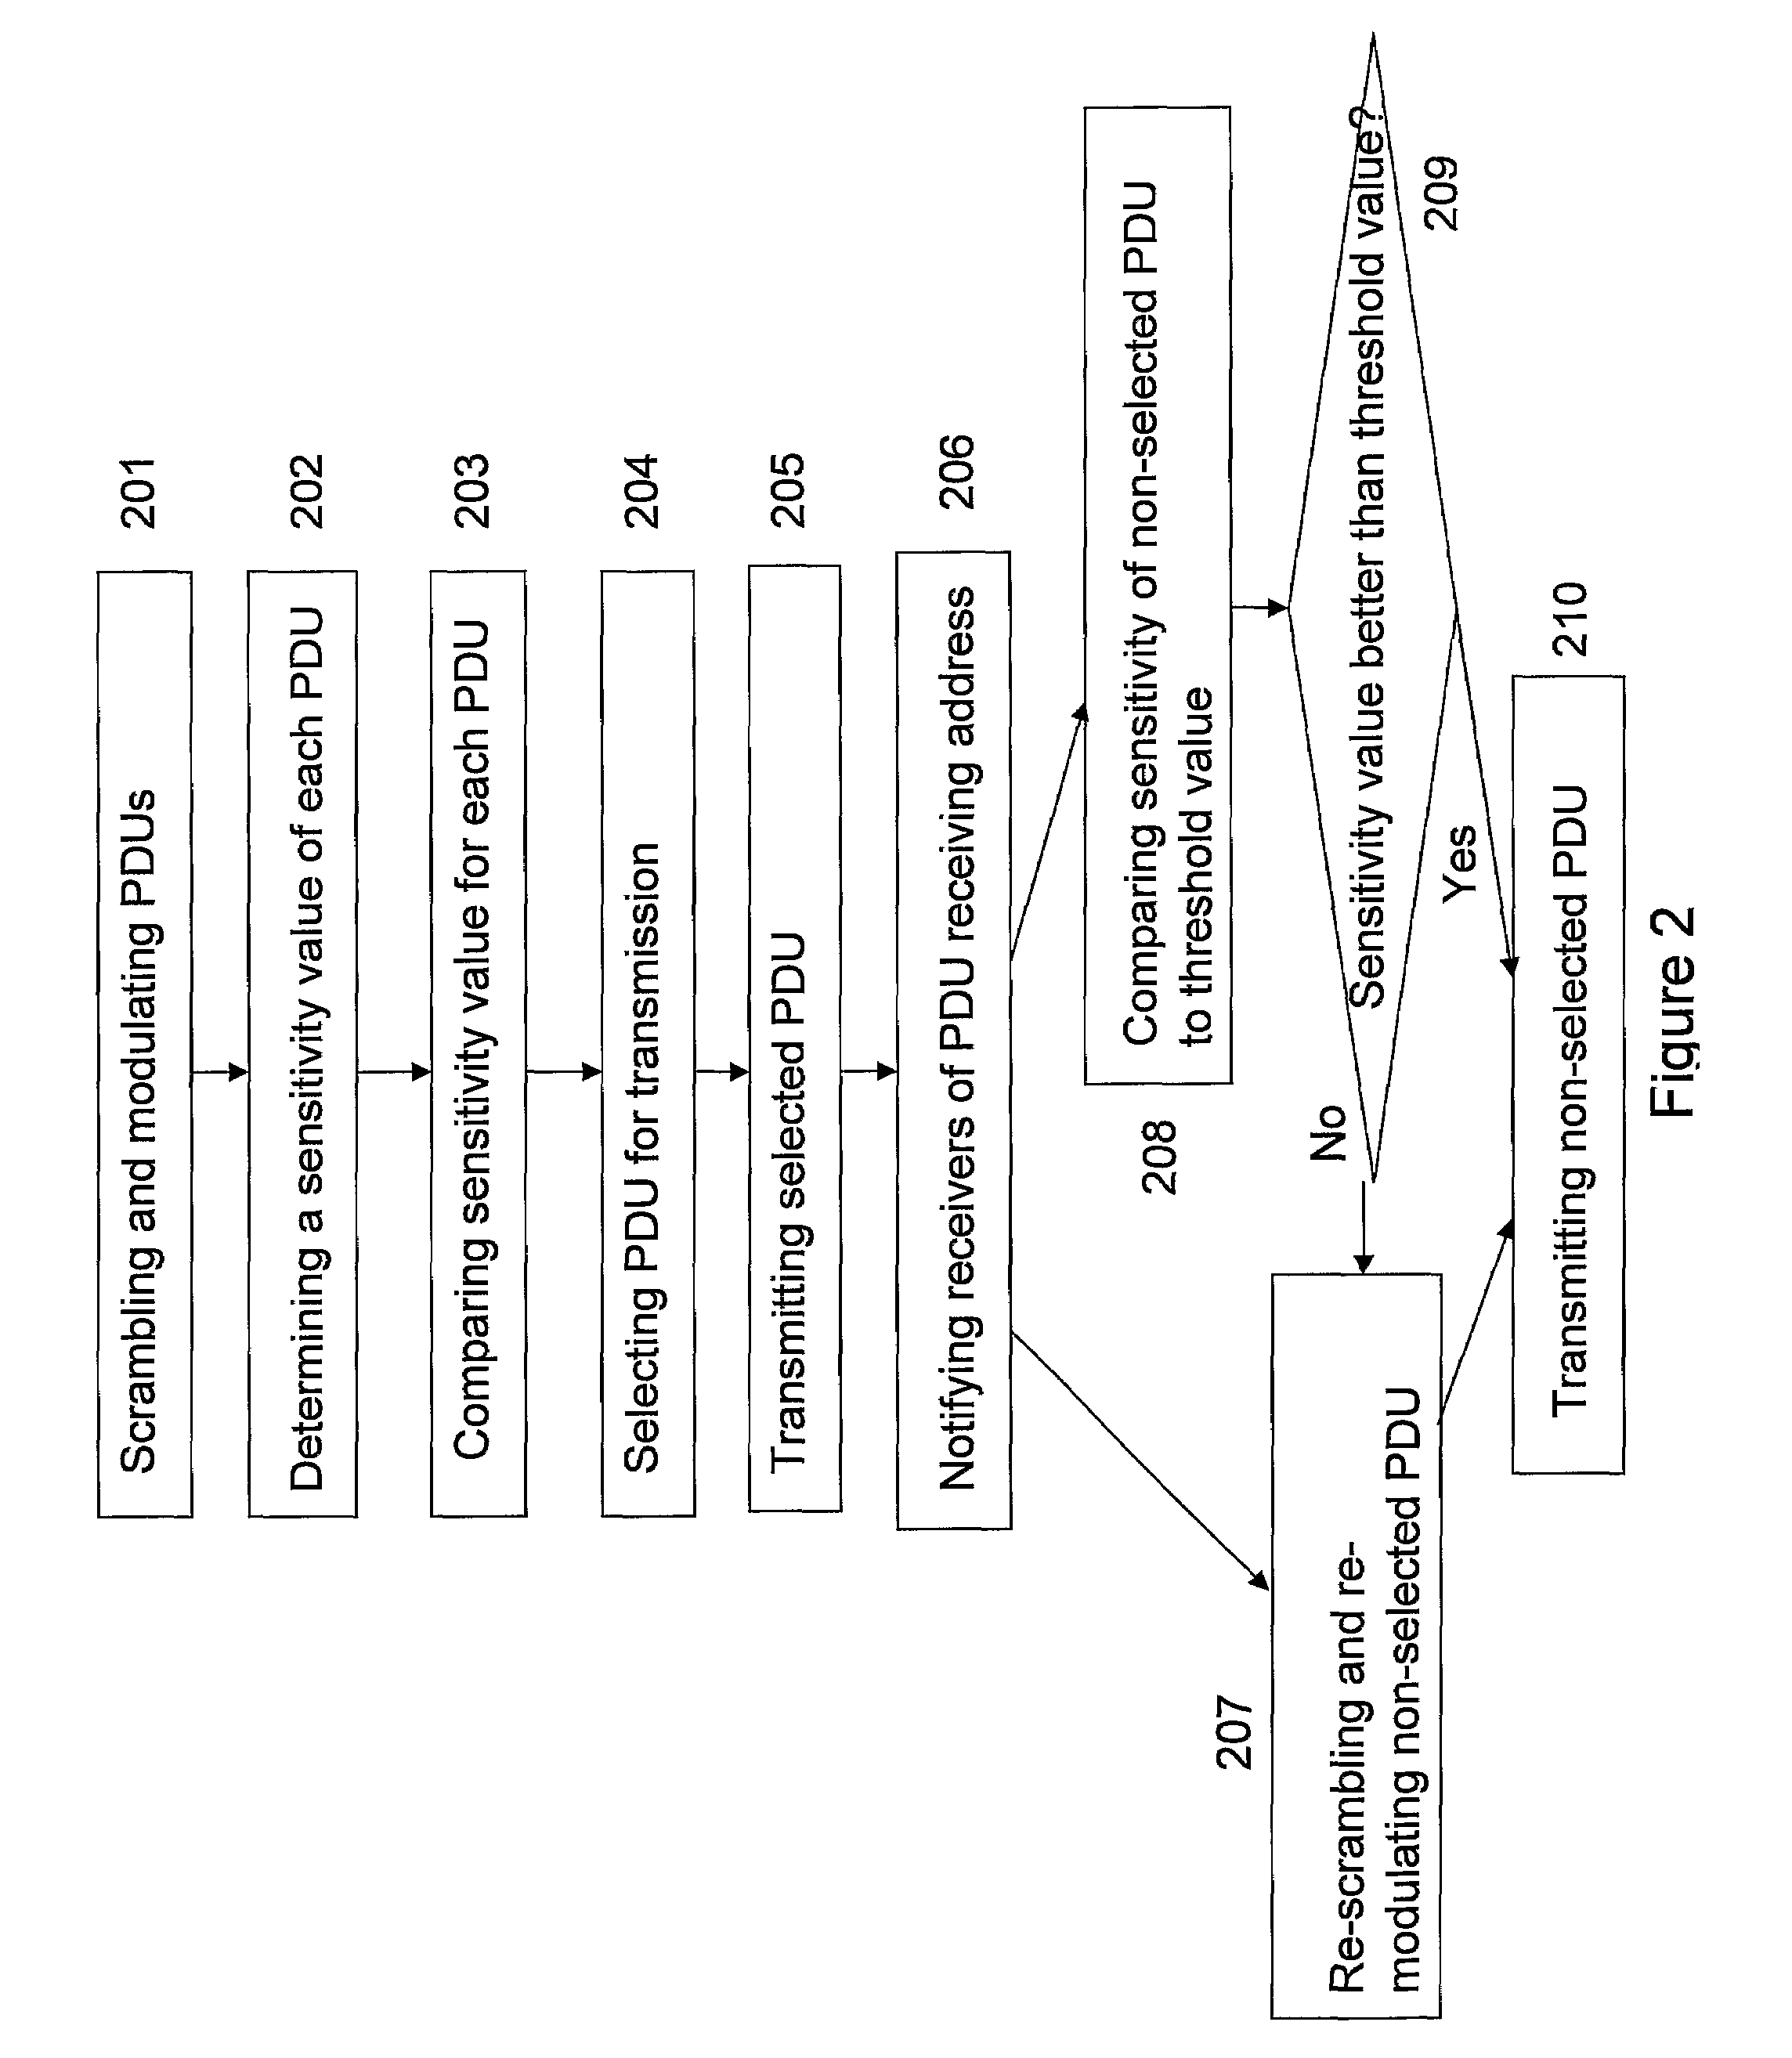 Transmitter apparatus and method for transmitting packet data units in a communication system